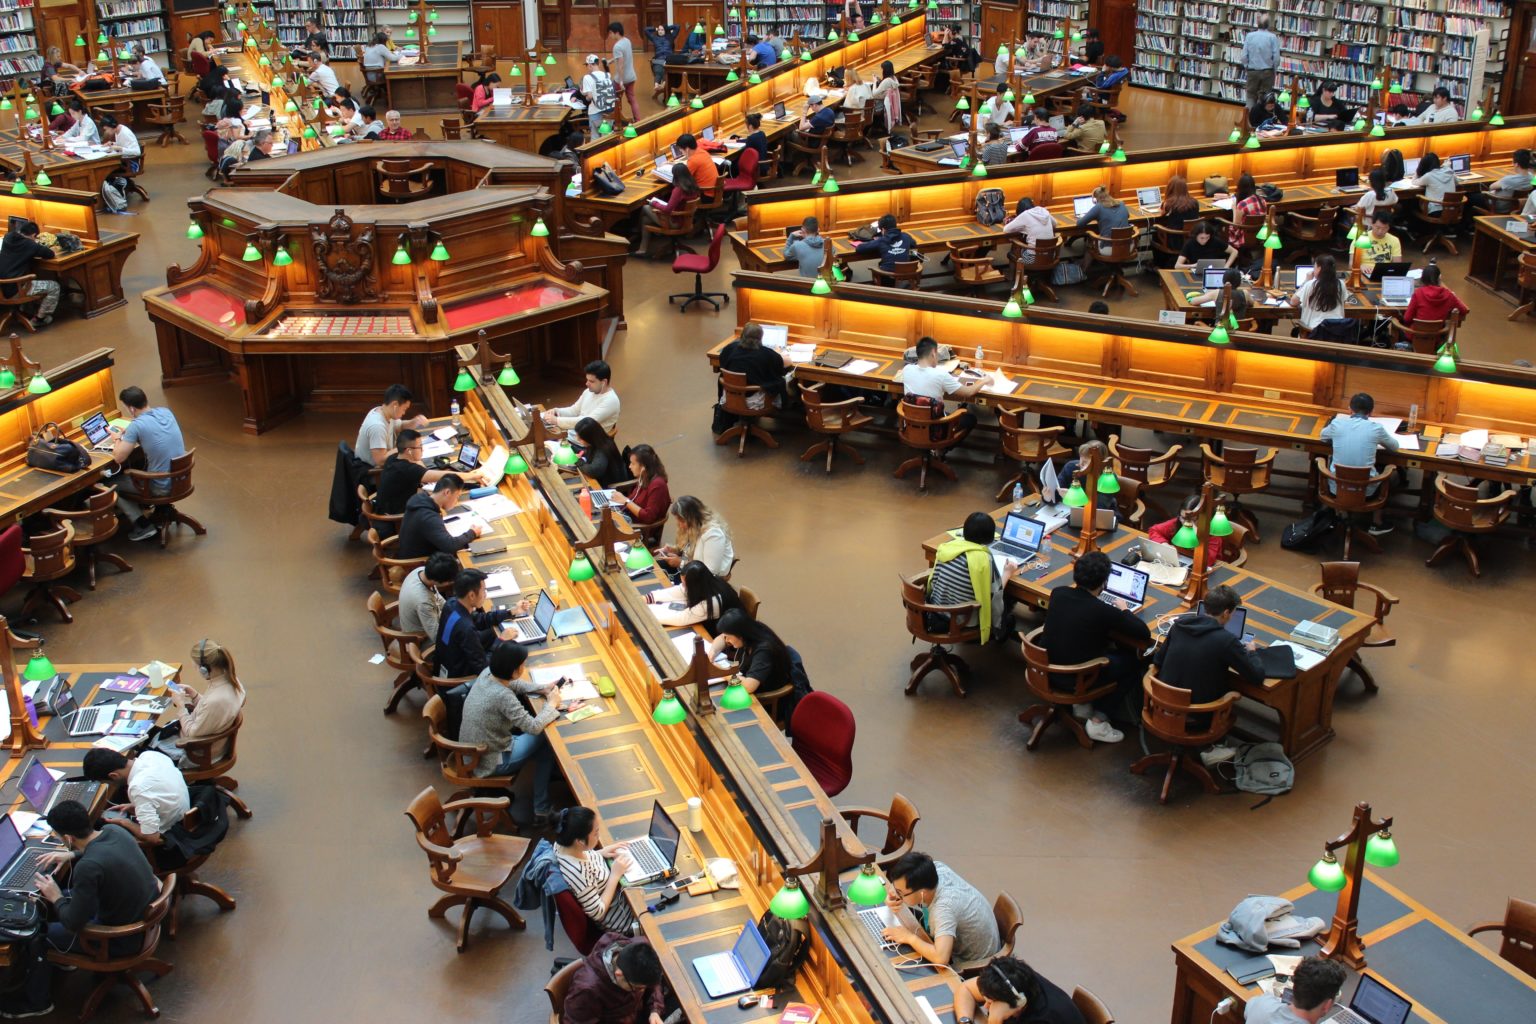 A overview of students studying in a library.